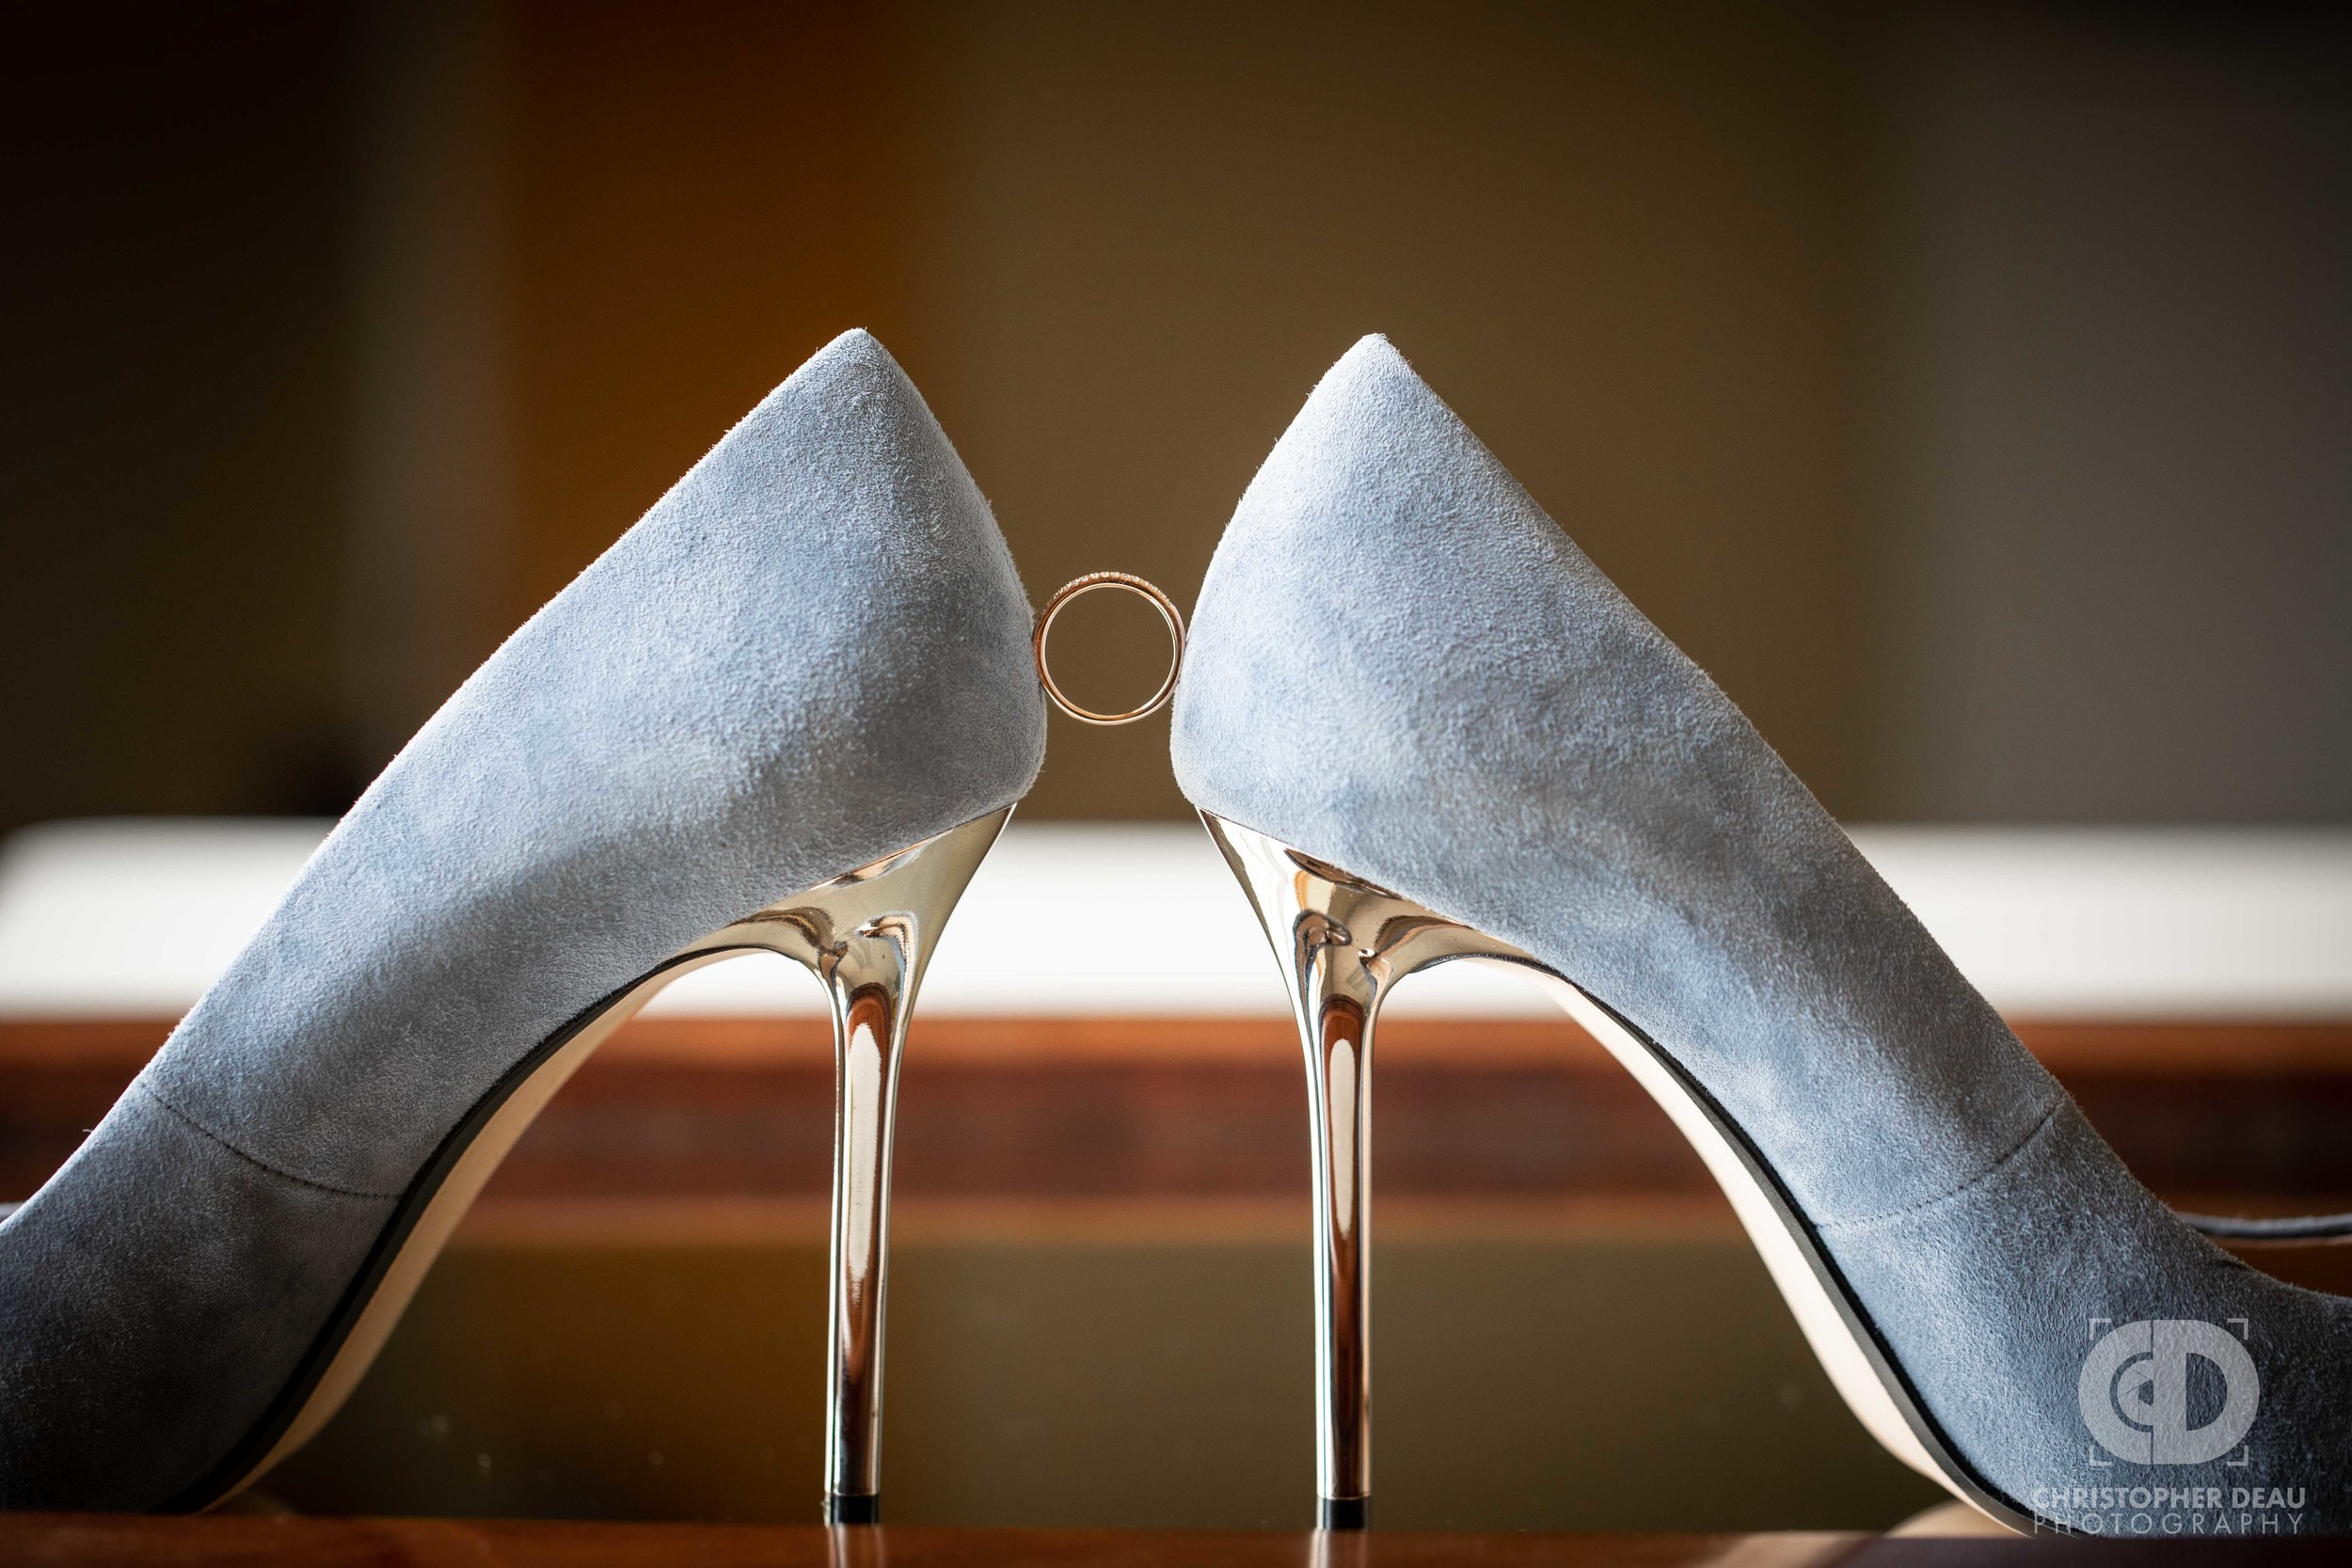  wedding ring wedged between shoes 